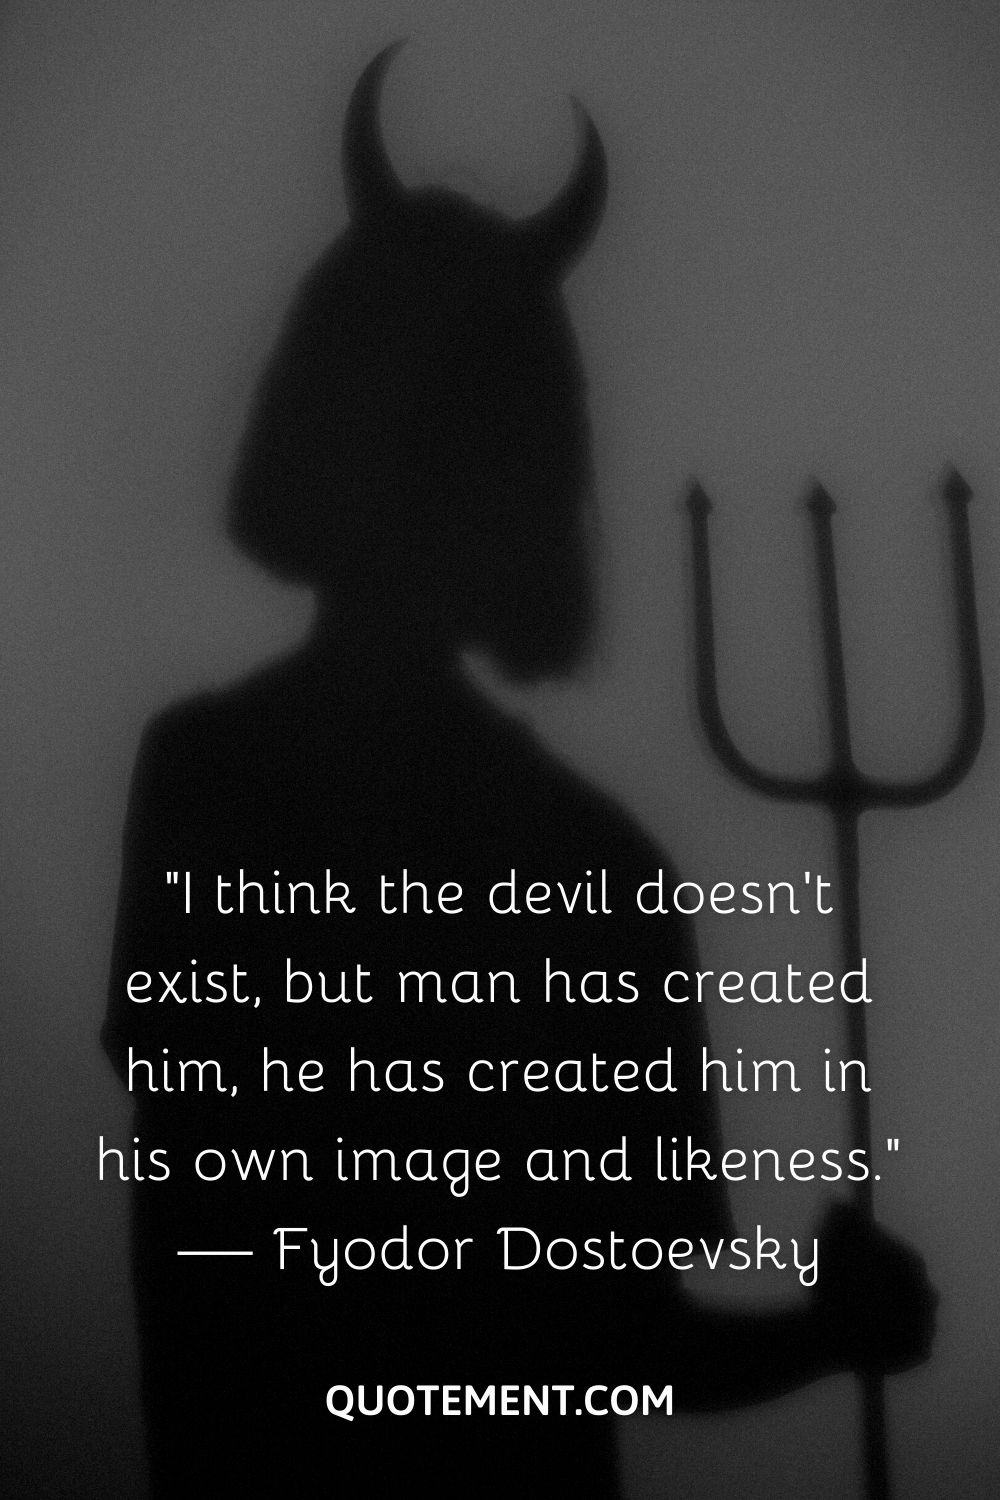 “I think the devil doesn’t exist, but man has created him, he has created him in his own image and likeness.” — Fyodor Dostoevsky